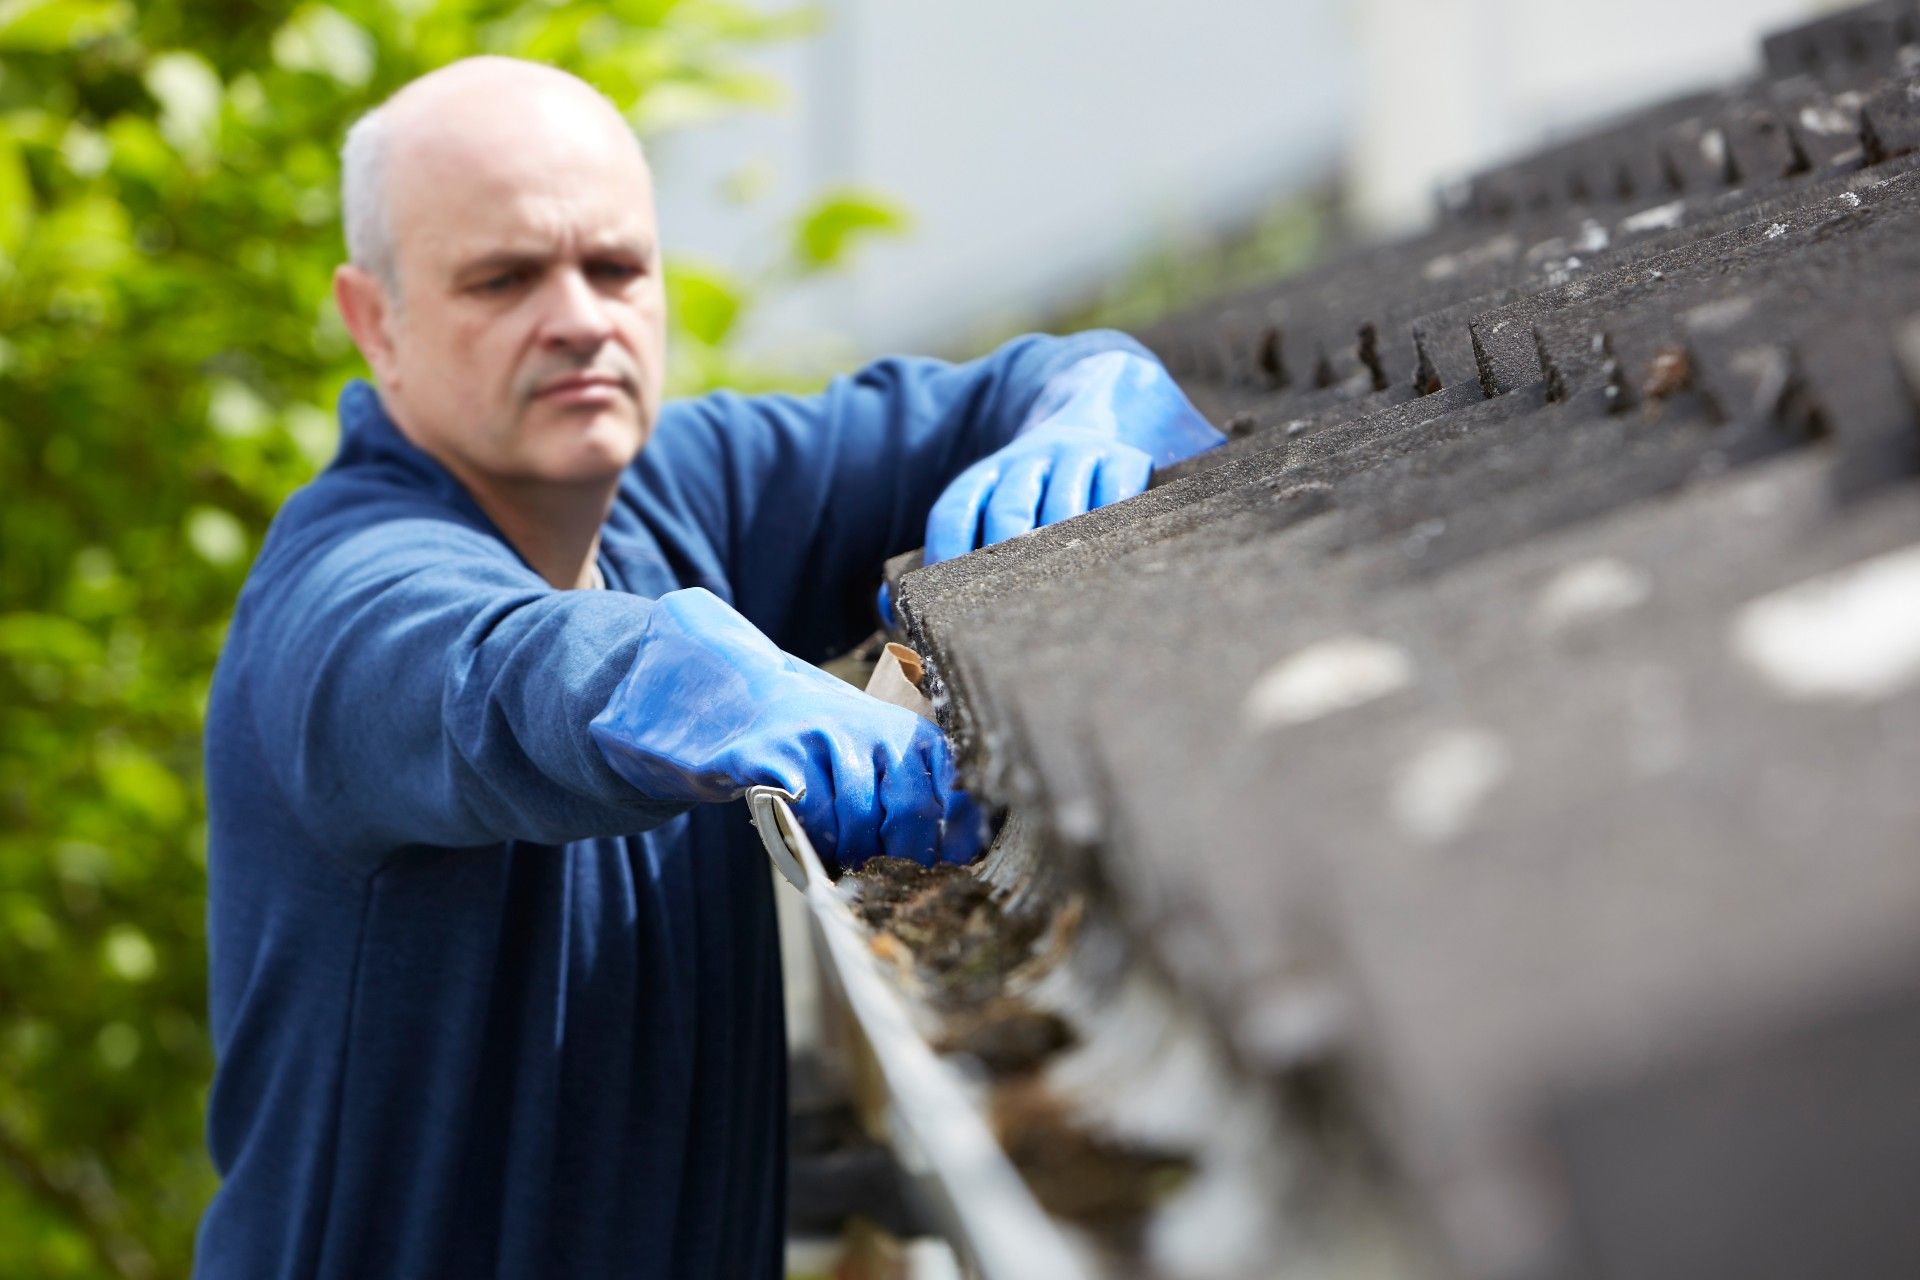 A man in blue gloves cleans the gutter on a house - LeafFilter gutter system